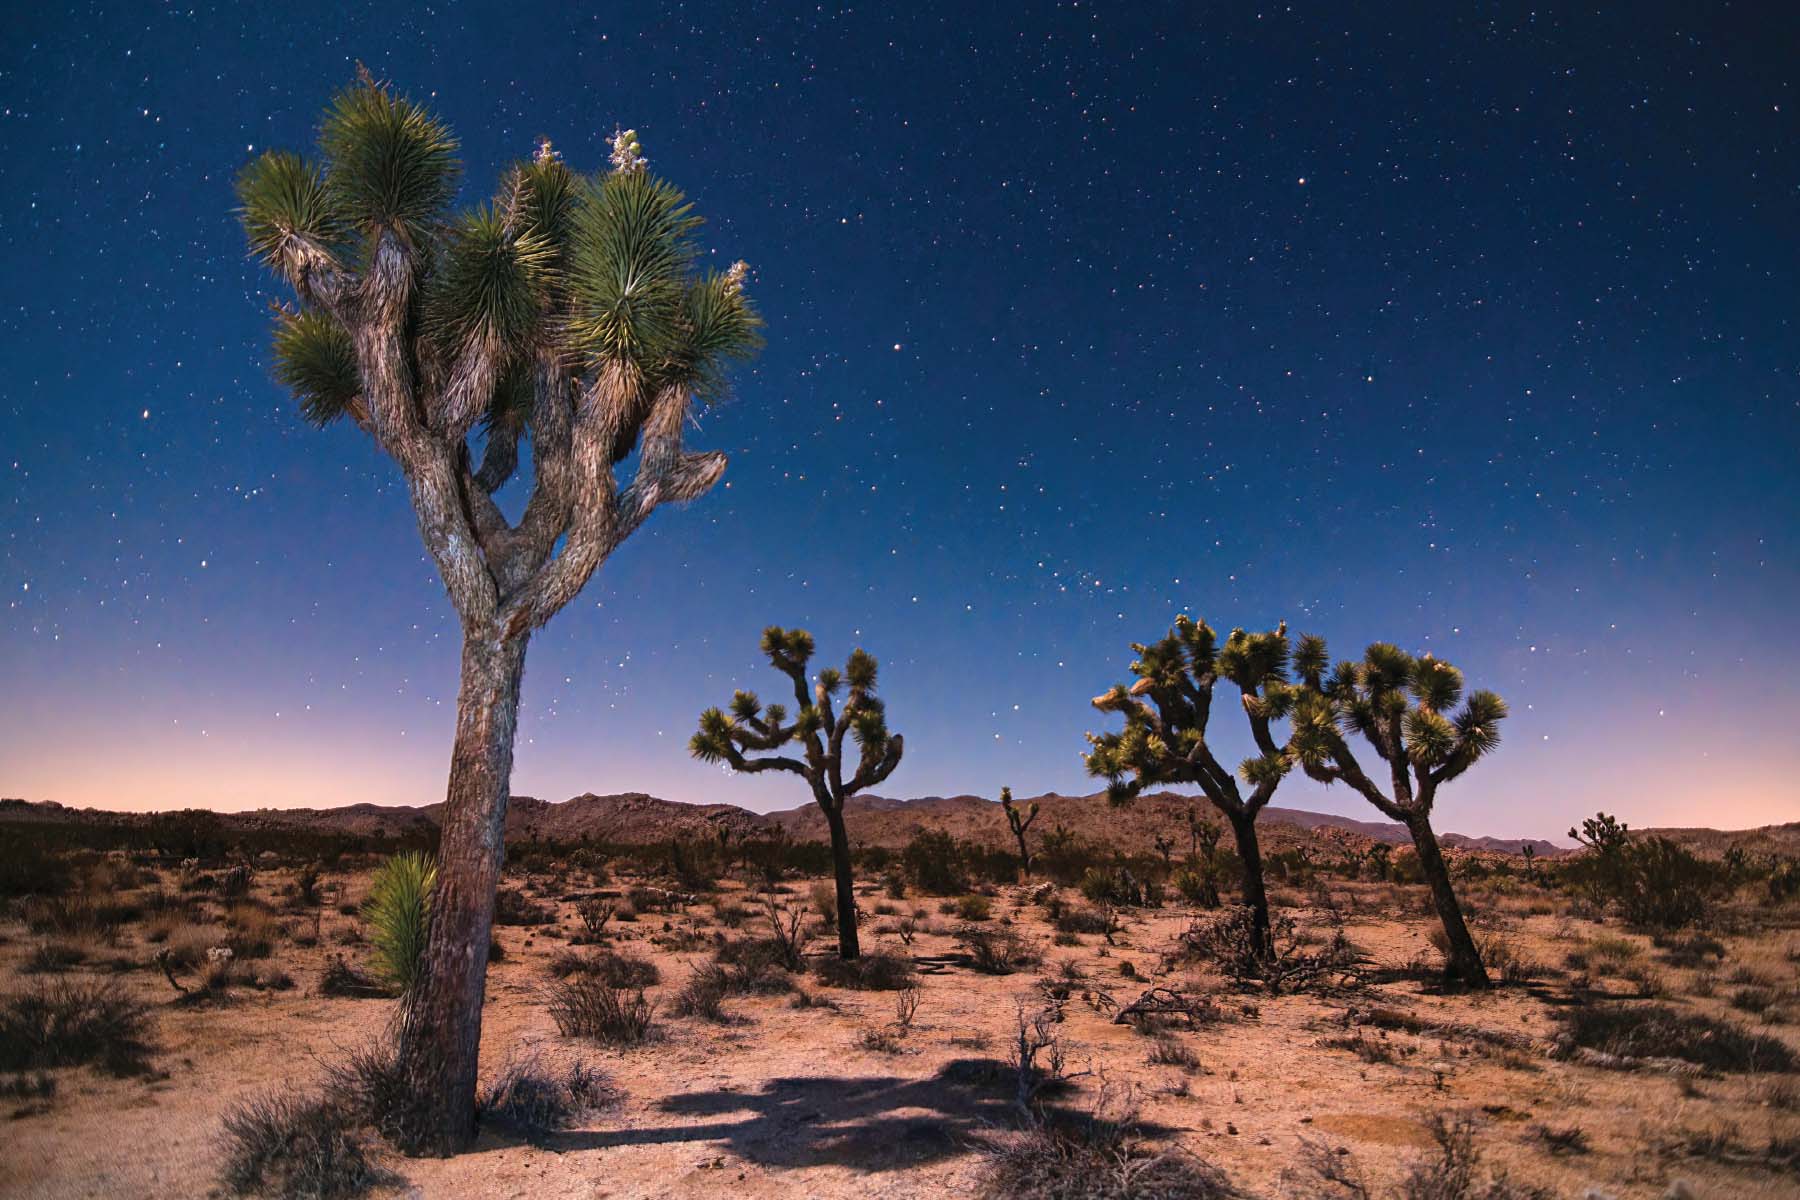 A photo taken by Nick Chill of Joshua Trees lit by a waxing gibbous moon